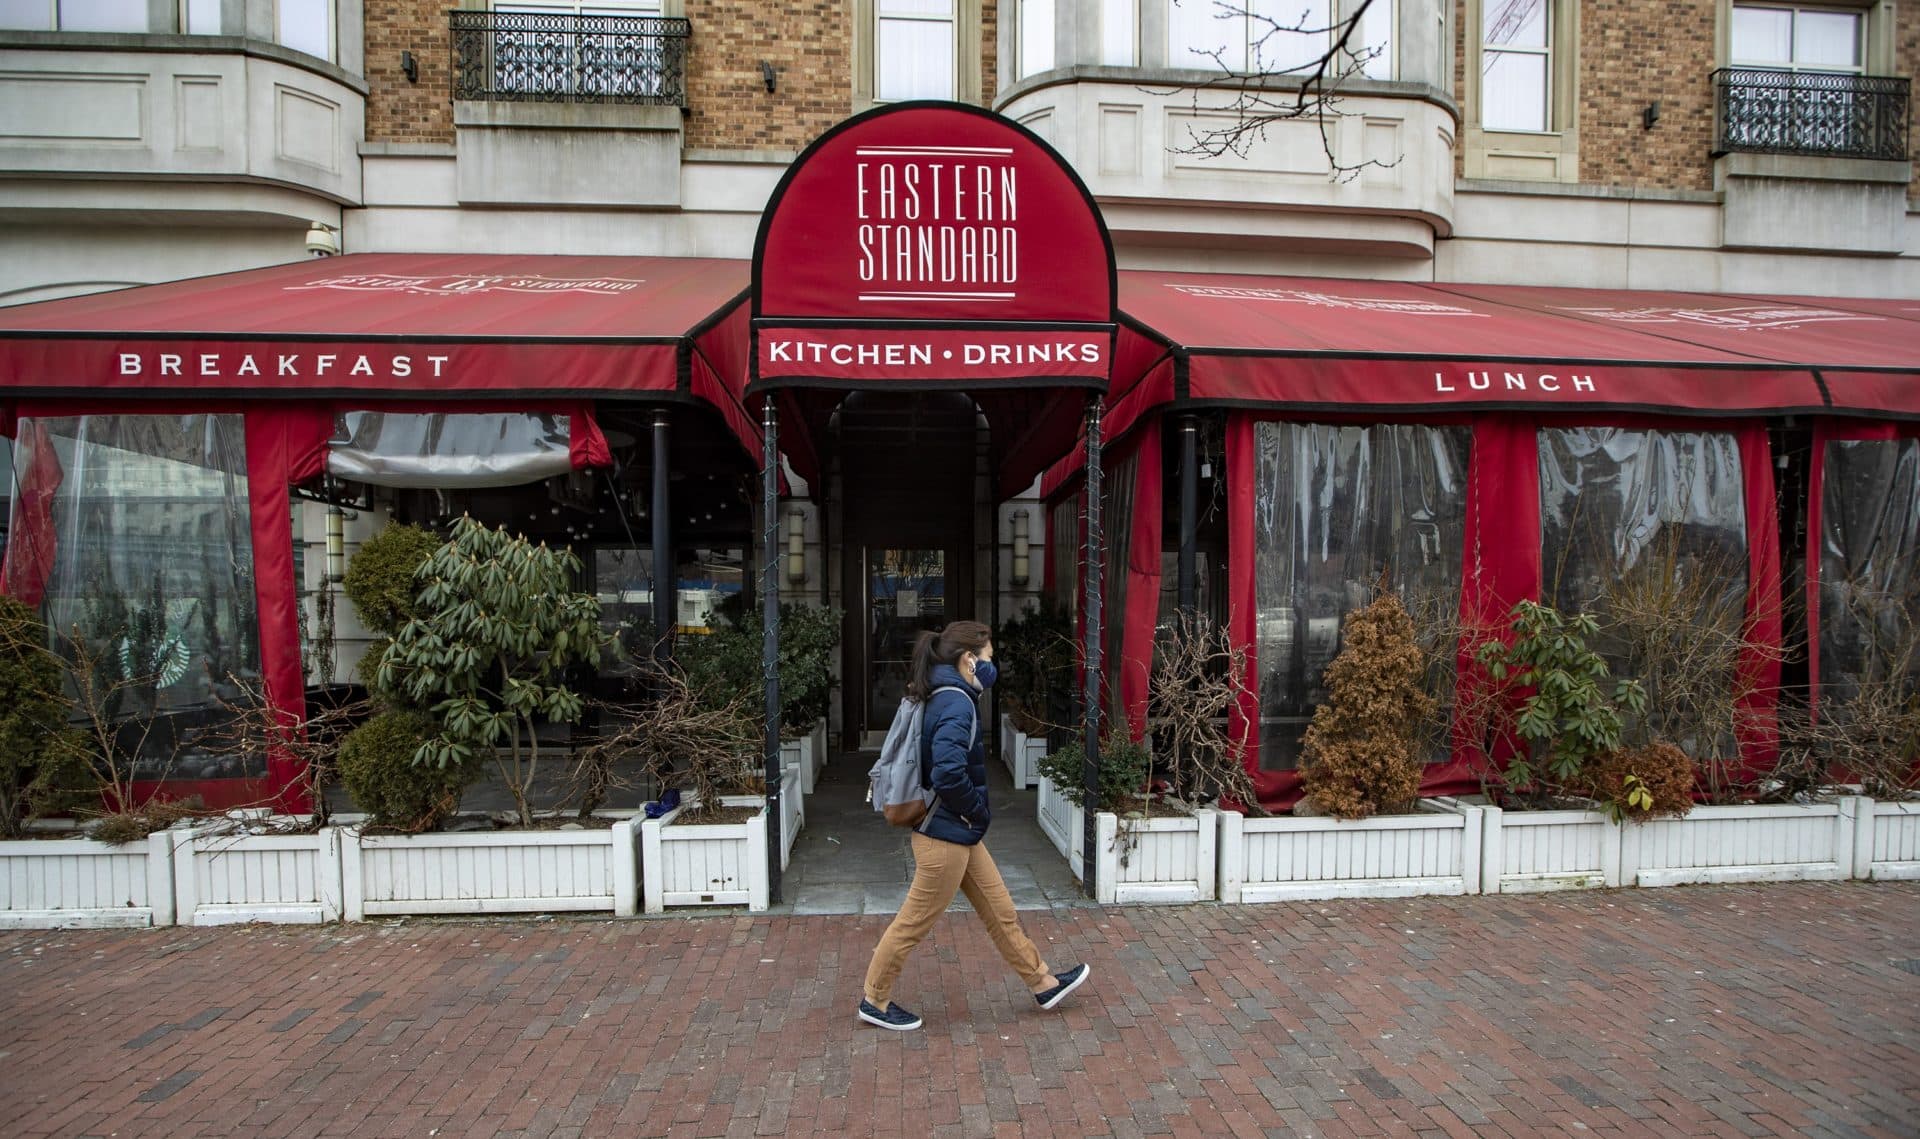 Border Cafe in Harvard Square has closed for good